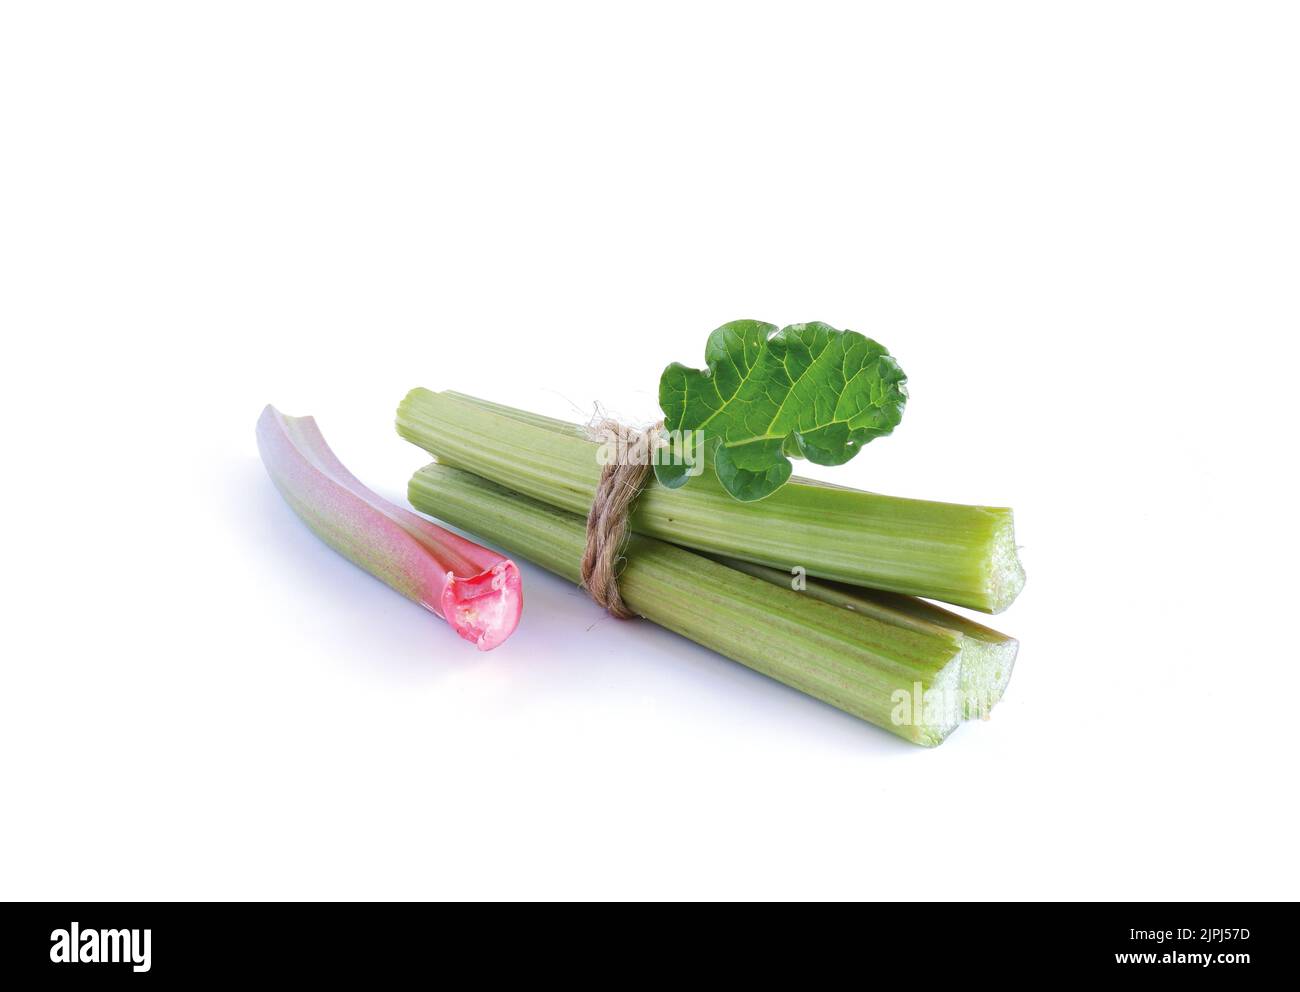 Red and green rhubarb stalks with a green leaf, tied with twine on a white background. Fresh useful plant from the garden.  Stock Photo